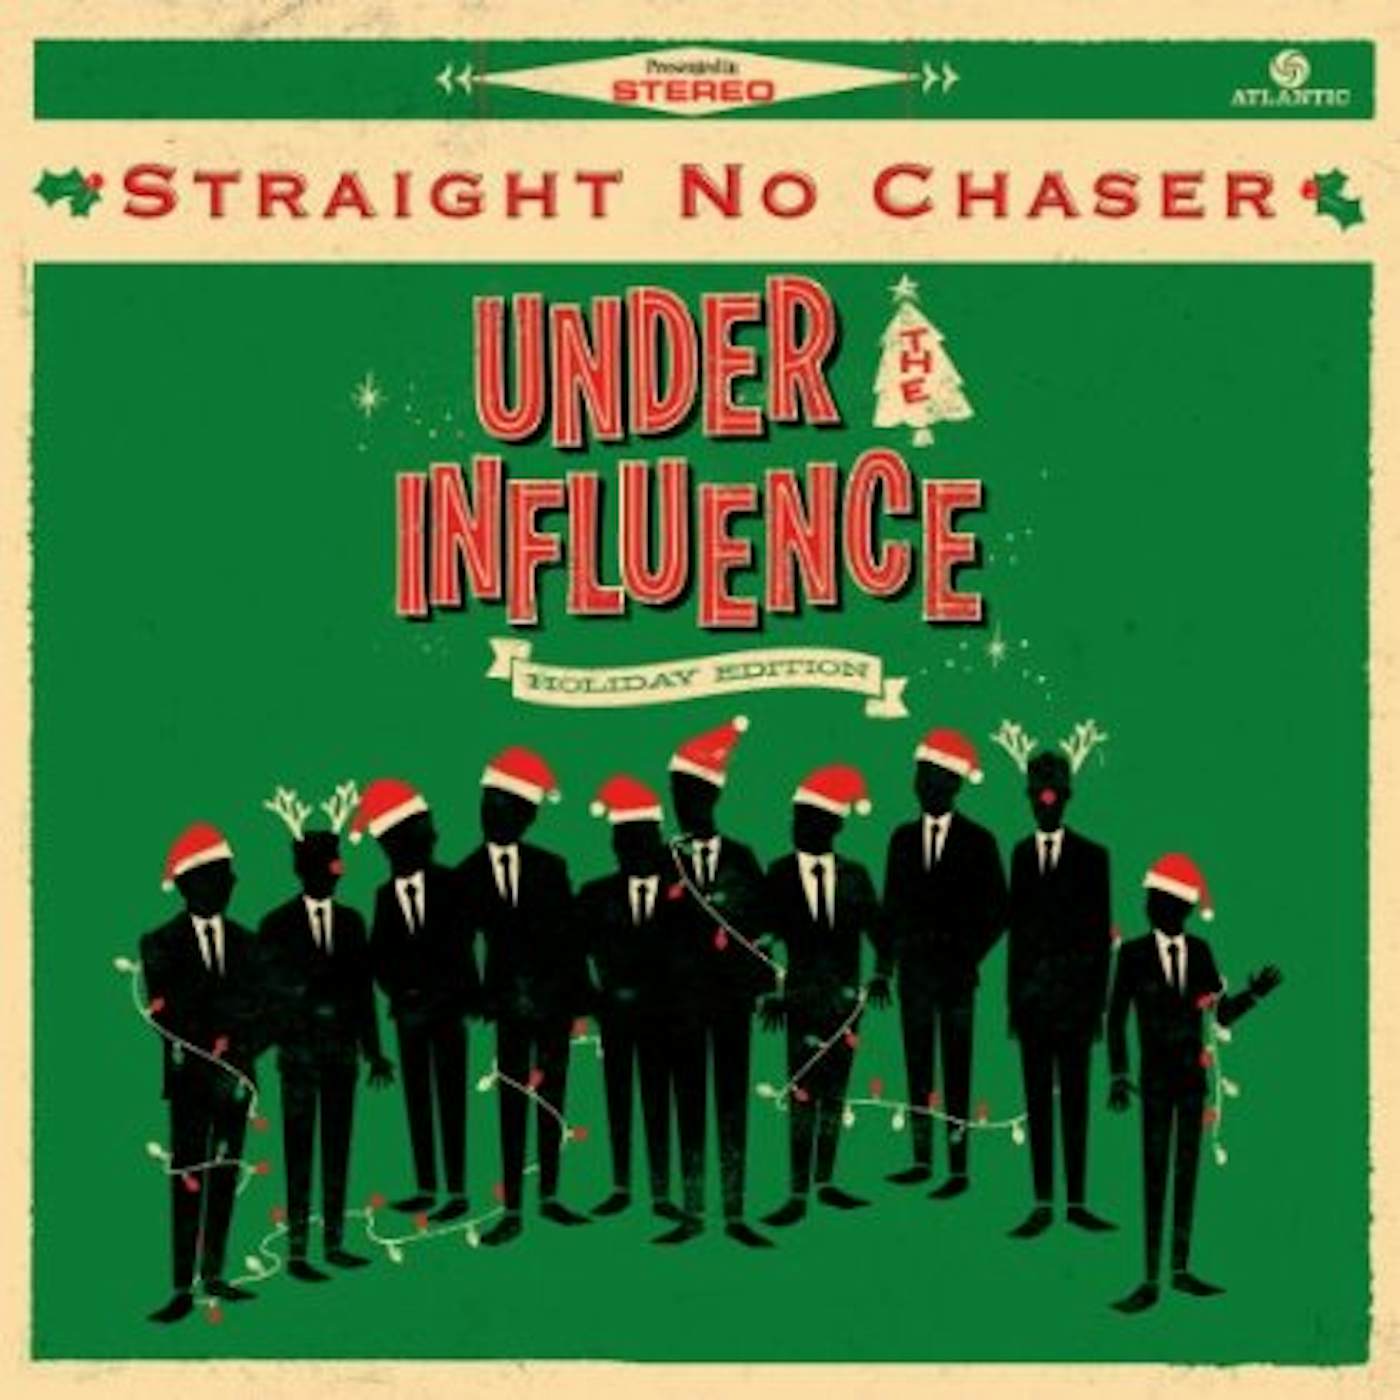 Straight No Chaser UNDER THE INFLUENCE: HOLIDAY EDITION CD